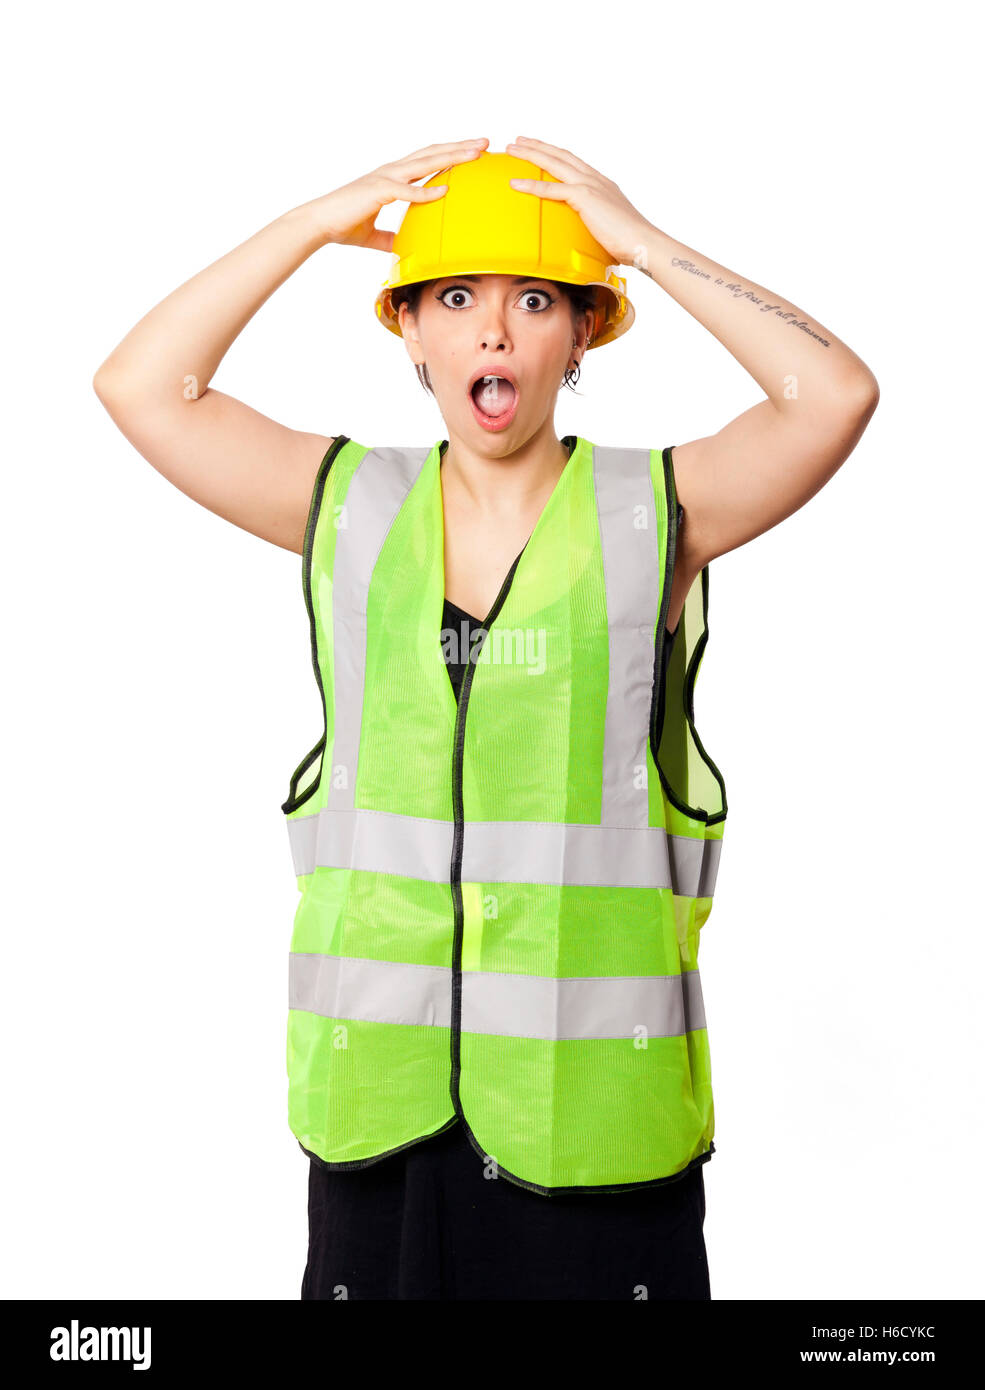 Caucasian young adult woman in her mid 20s wearing reflective yellow safety helmet and safety vest, raising her hands on her hat Stock Photo